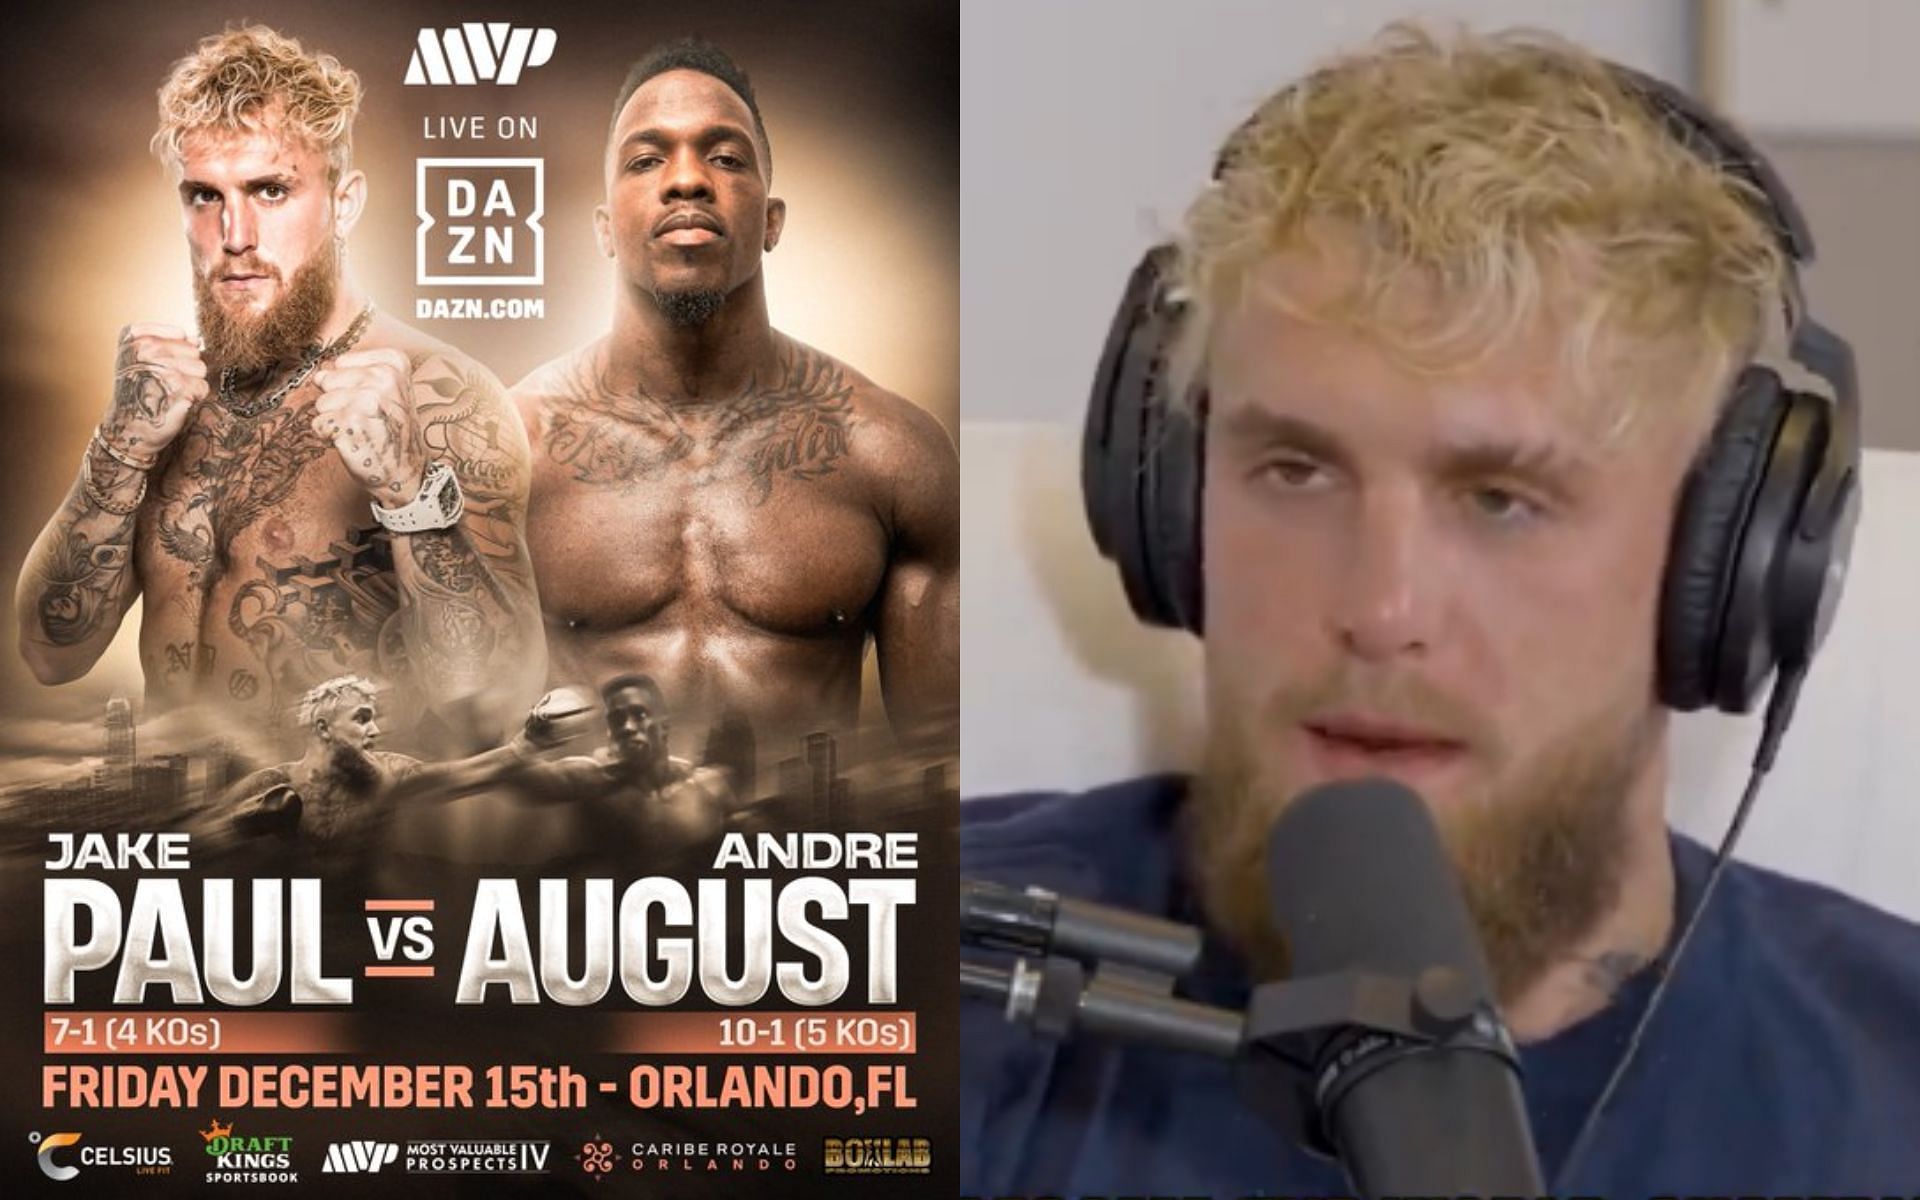 Jake Paul [Right] opened up about his upcoming boxing bout against Andre August [Left] [Image courtesy: @jekpaul and @HappyPunch - X]